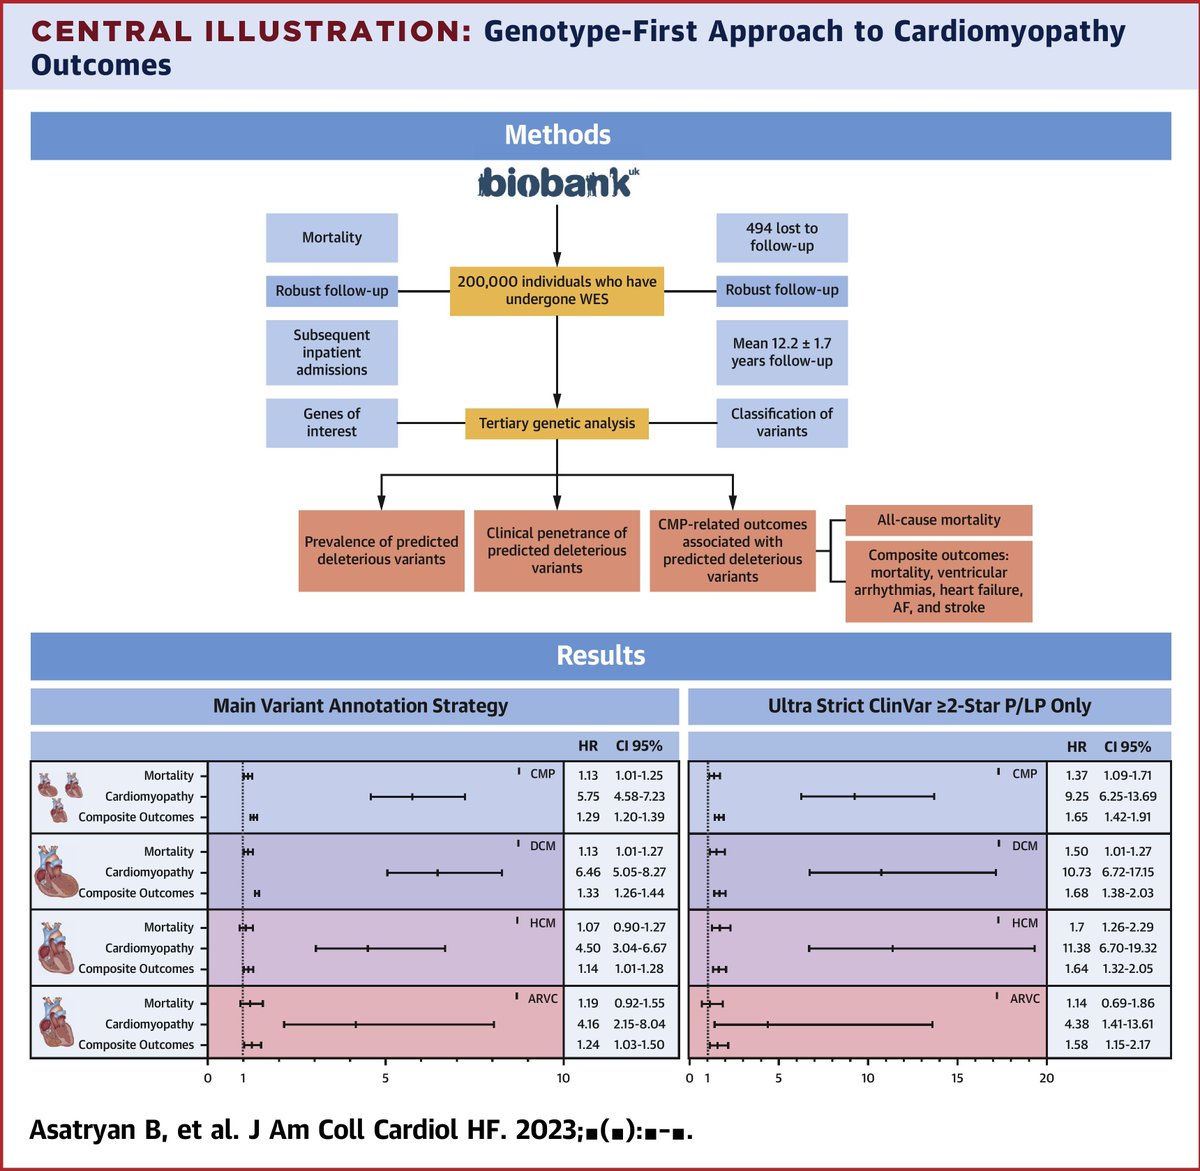 I am so glad to see our latest work on Genotype-First Look at Cardiomyopathy-Related Outcomes published in #JACCHF. Thanks #GenotypeFirstInvestigators for your help and support! @JACCJournals @AnwarChahal @APLandstrom @CSHeartResearch jacc.org/doi/10.1016/j.…